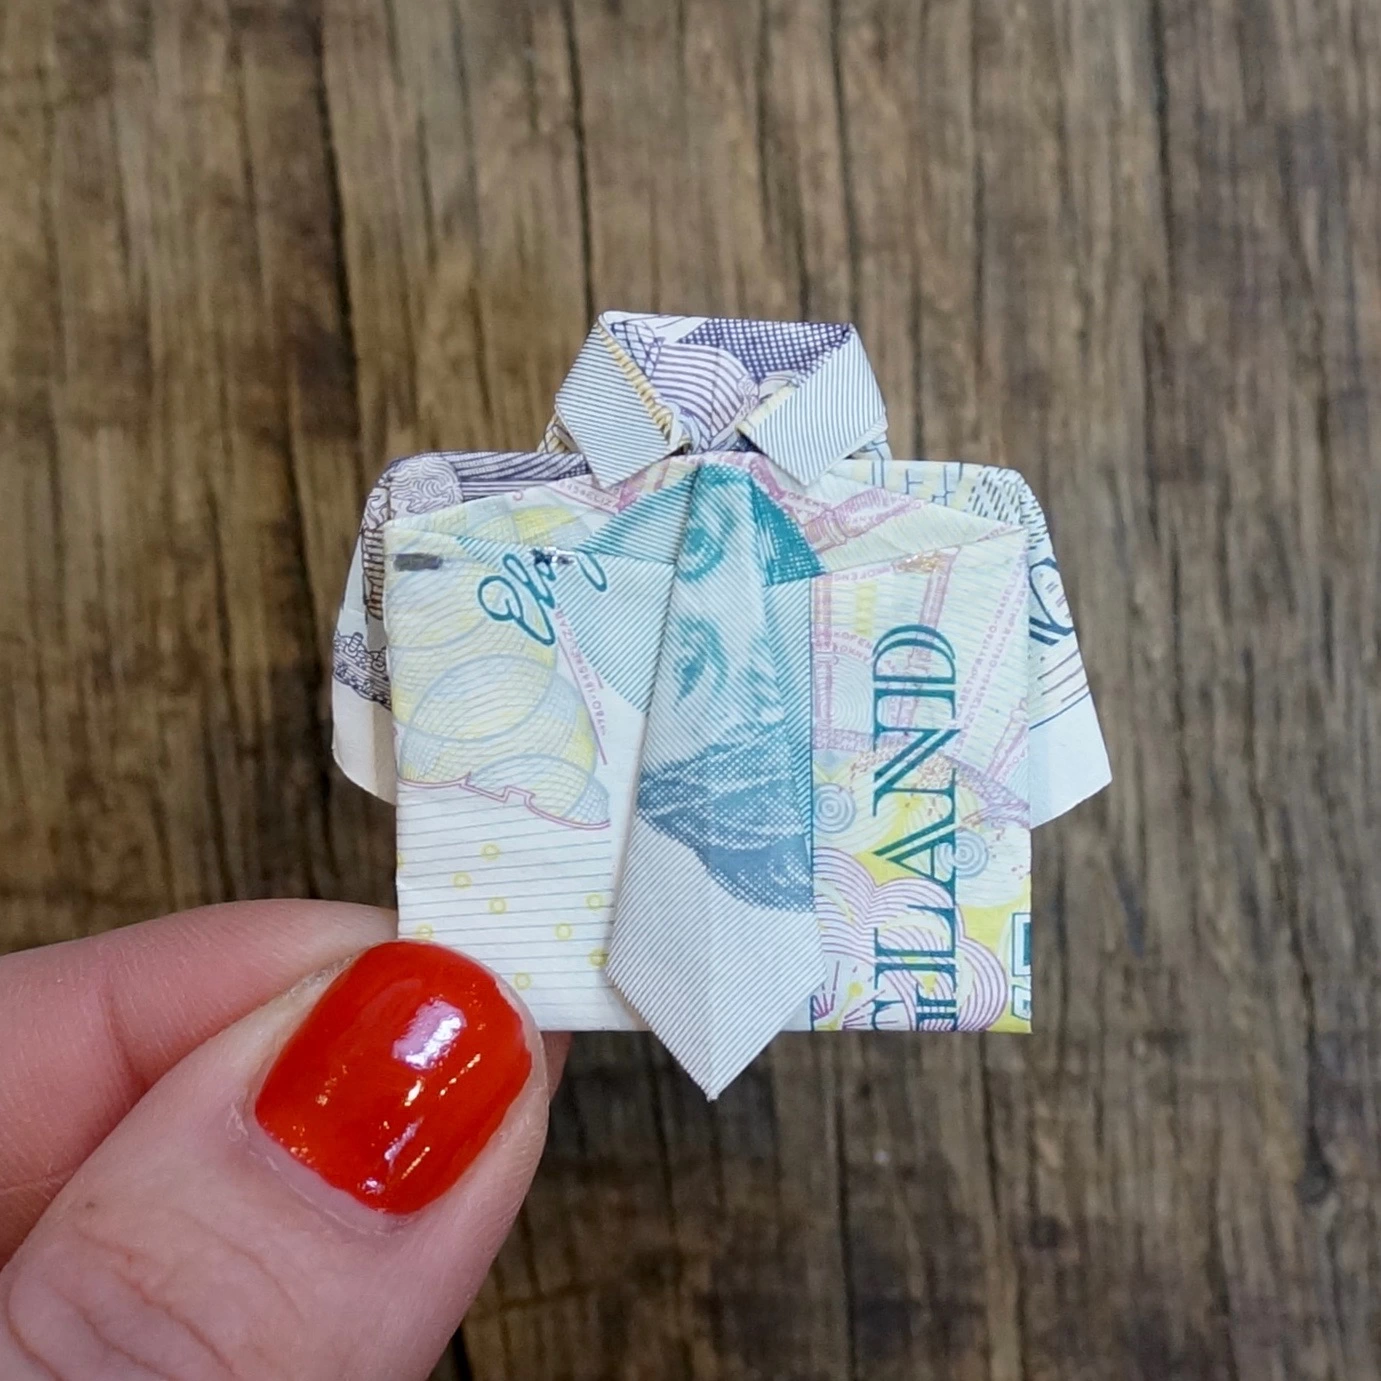 Woman's hand holing an origami shirt made from a five pound note 